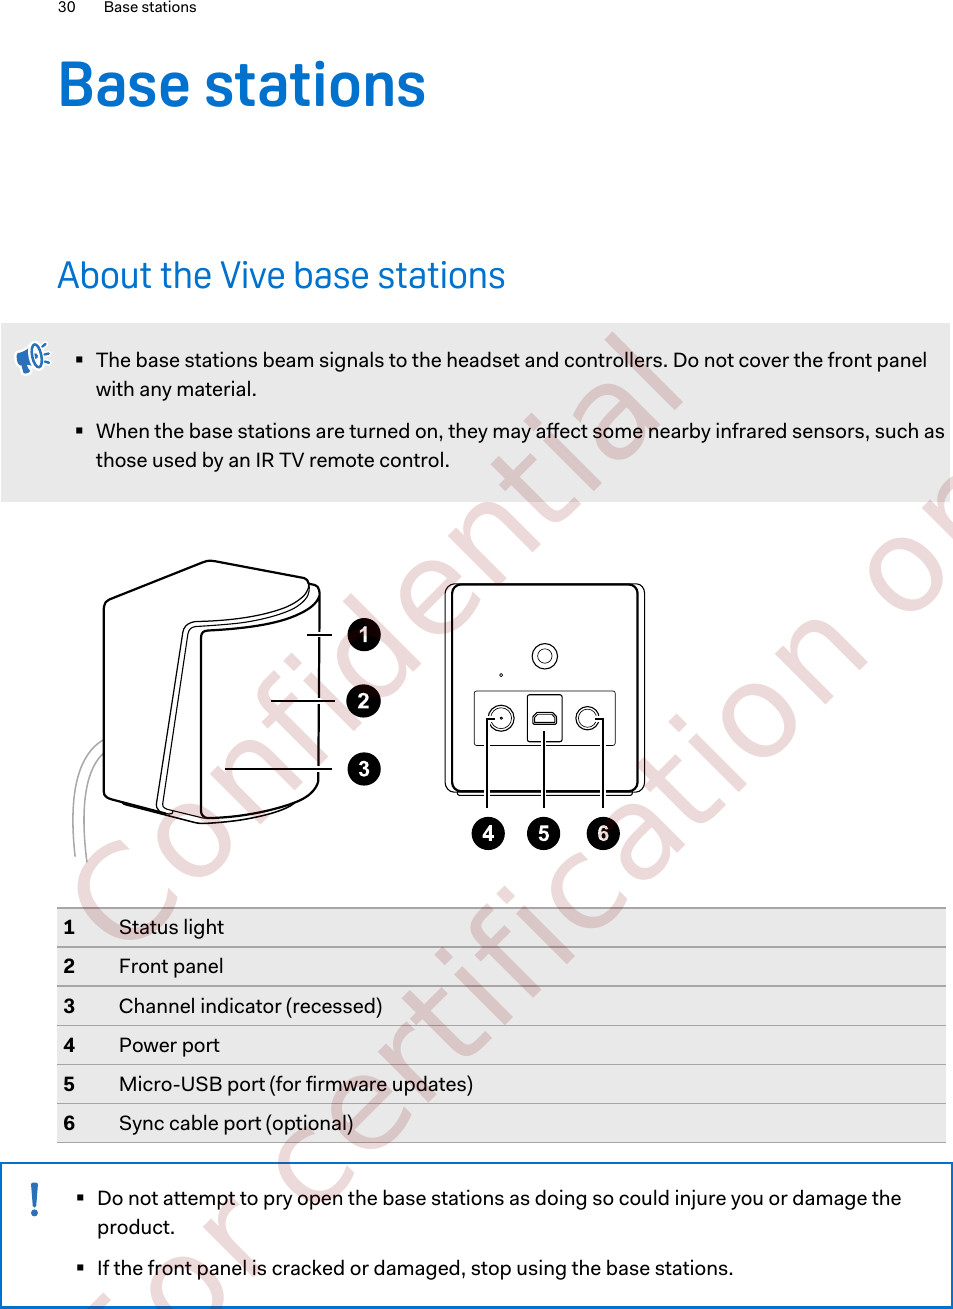 Base stationsAbout the Vive base stations§The base stations beam signals to the headset and controllers. Do not cover the front panelwith any material.§When the base stations are turned on, they may affect some nearby infrared sensors, such asthose used by an IR TV remote control.1Status light2Front panel3Channel indicator (recessed)4Power port5Micro-USB port (for firmware updates)6Sync cable port (optional)§Do not attempt to pry open the base stations as doing so could injure you or damage theproduct.§If the front panel is cracked or damaged, stop using the base stations.30 Base stations        Confidential  For certification only